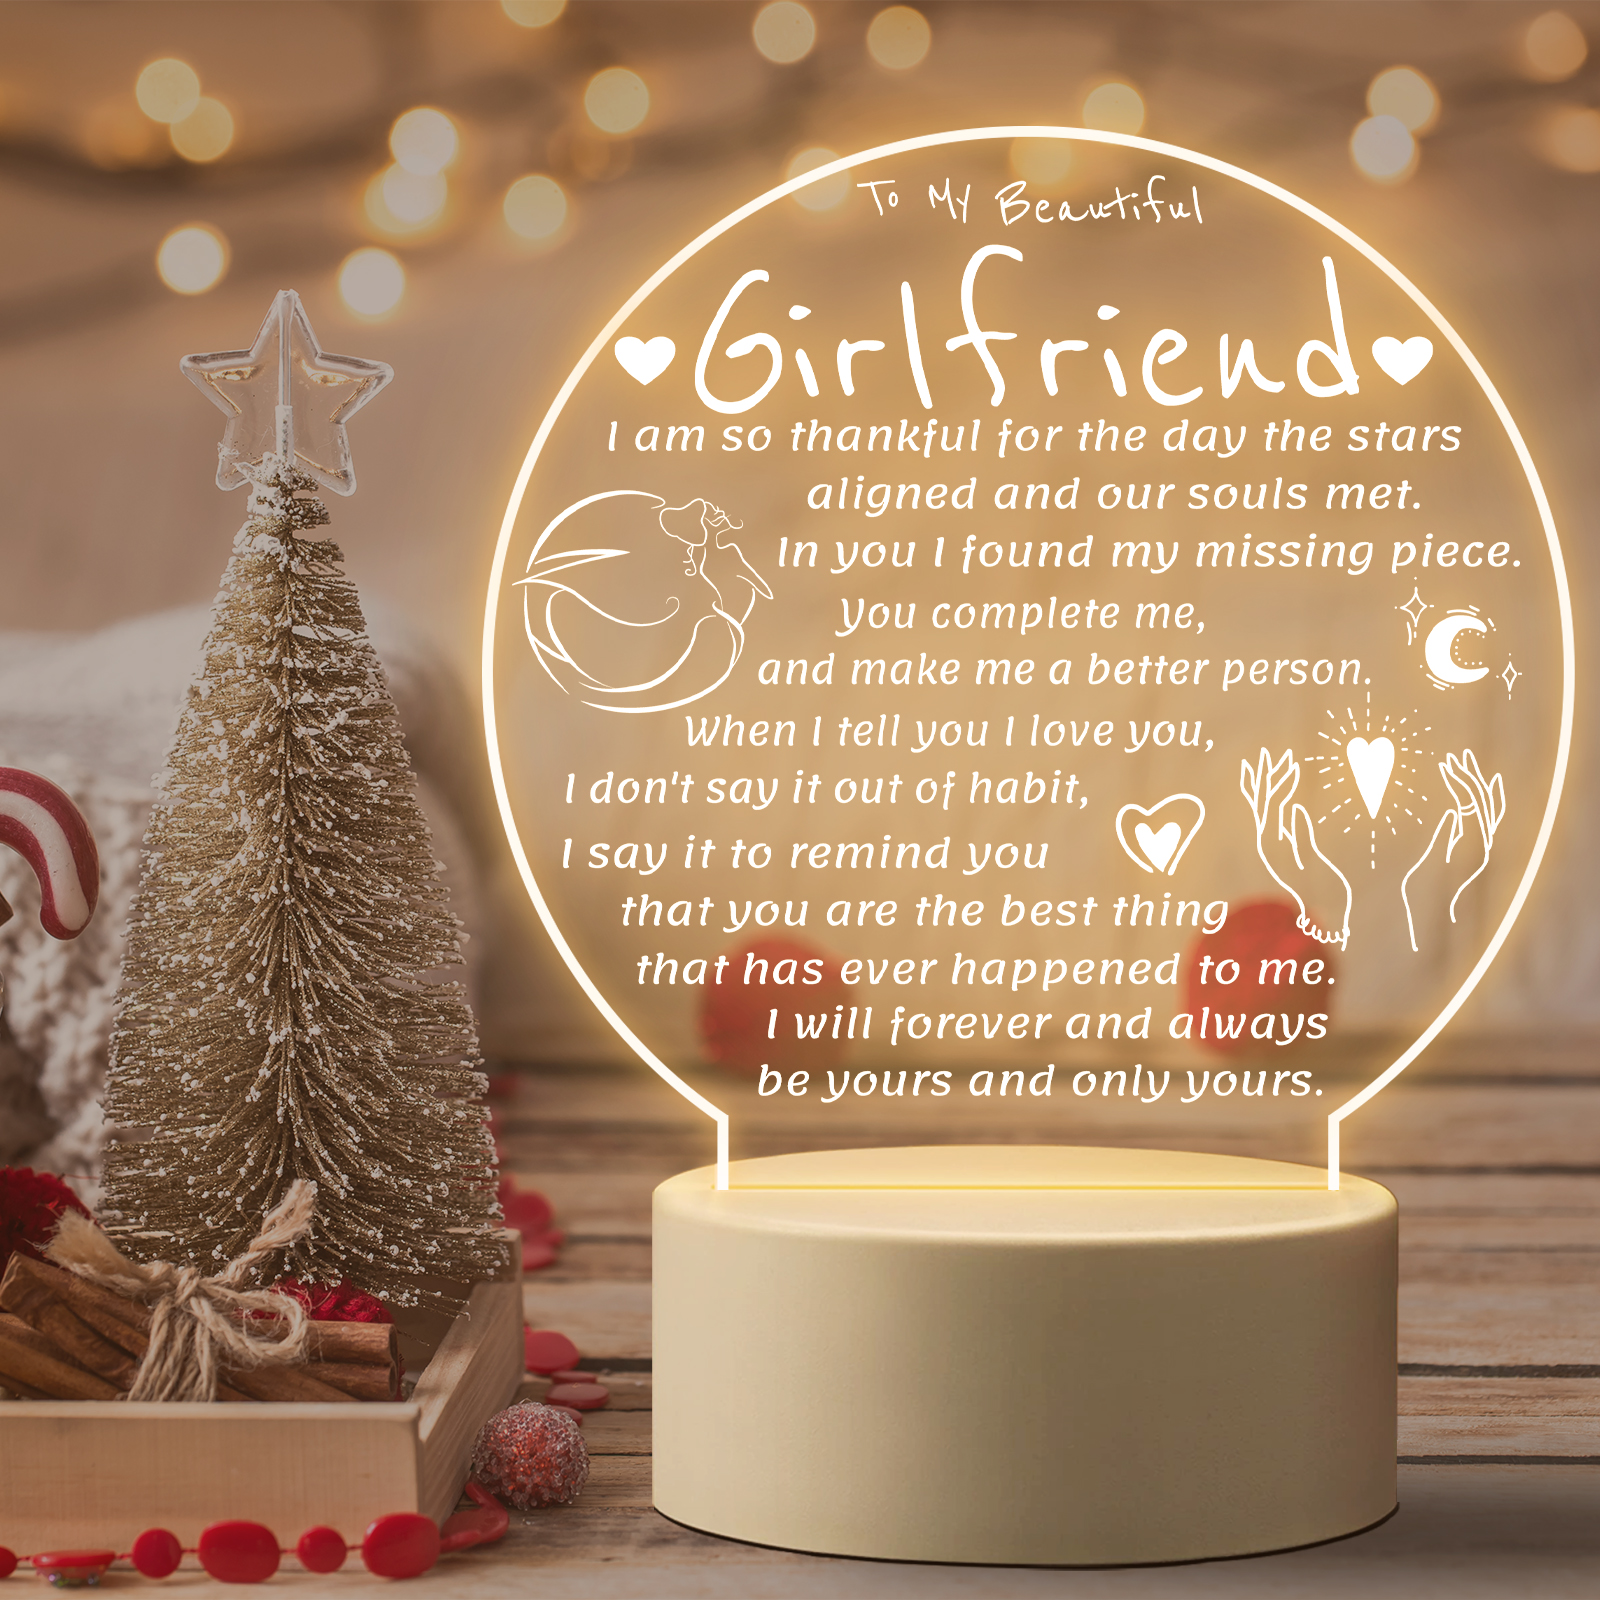 Will You Be My Girlfriend ?  Me as a girlfriend, Beauty gift, Gifts